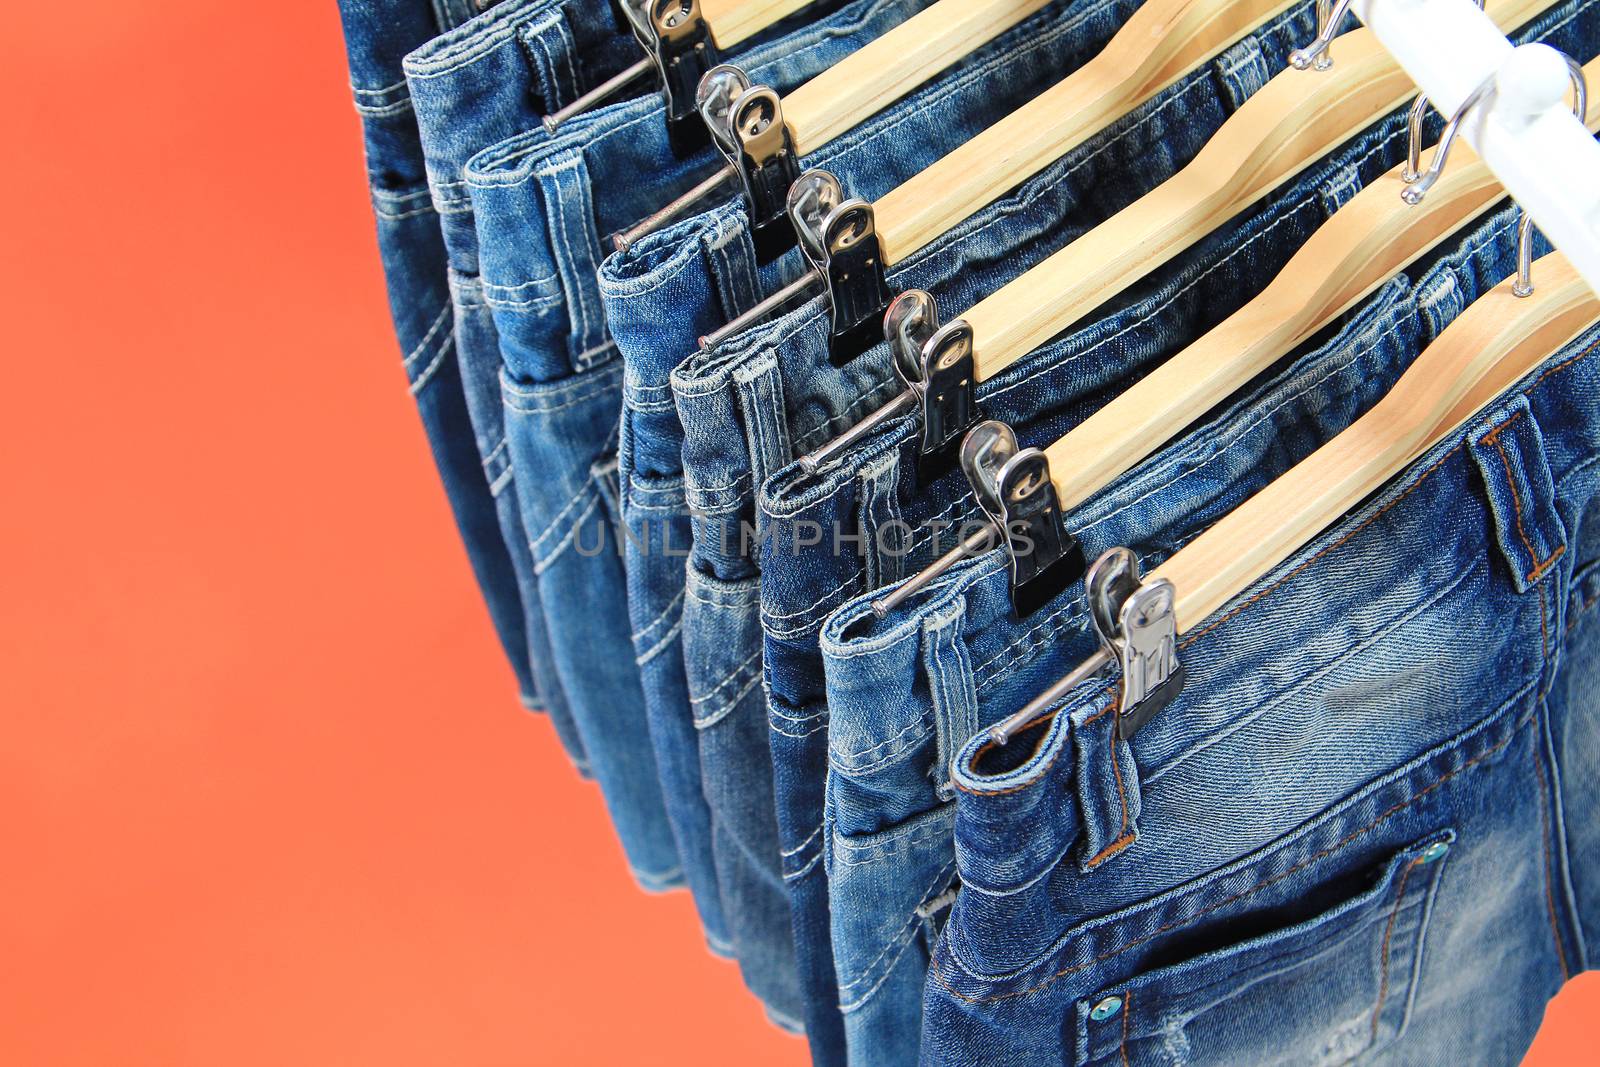 Row of hanged blue jeans